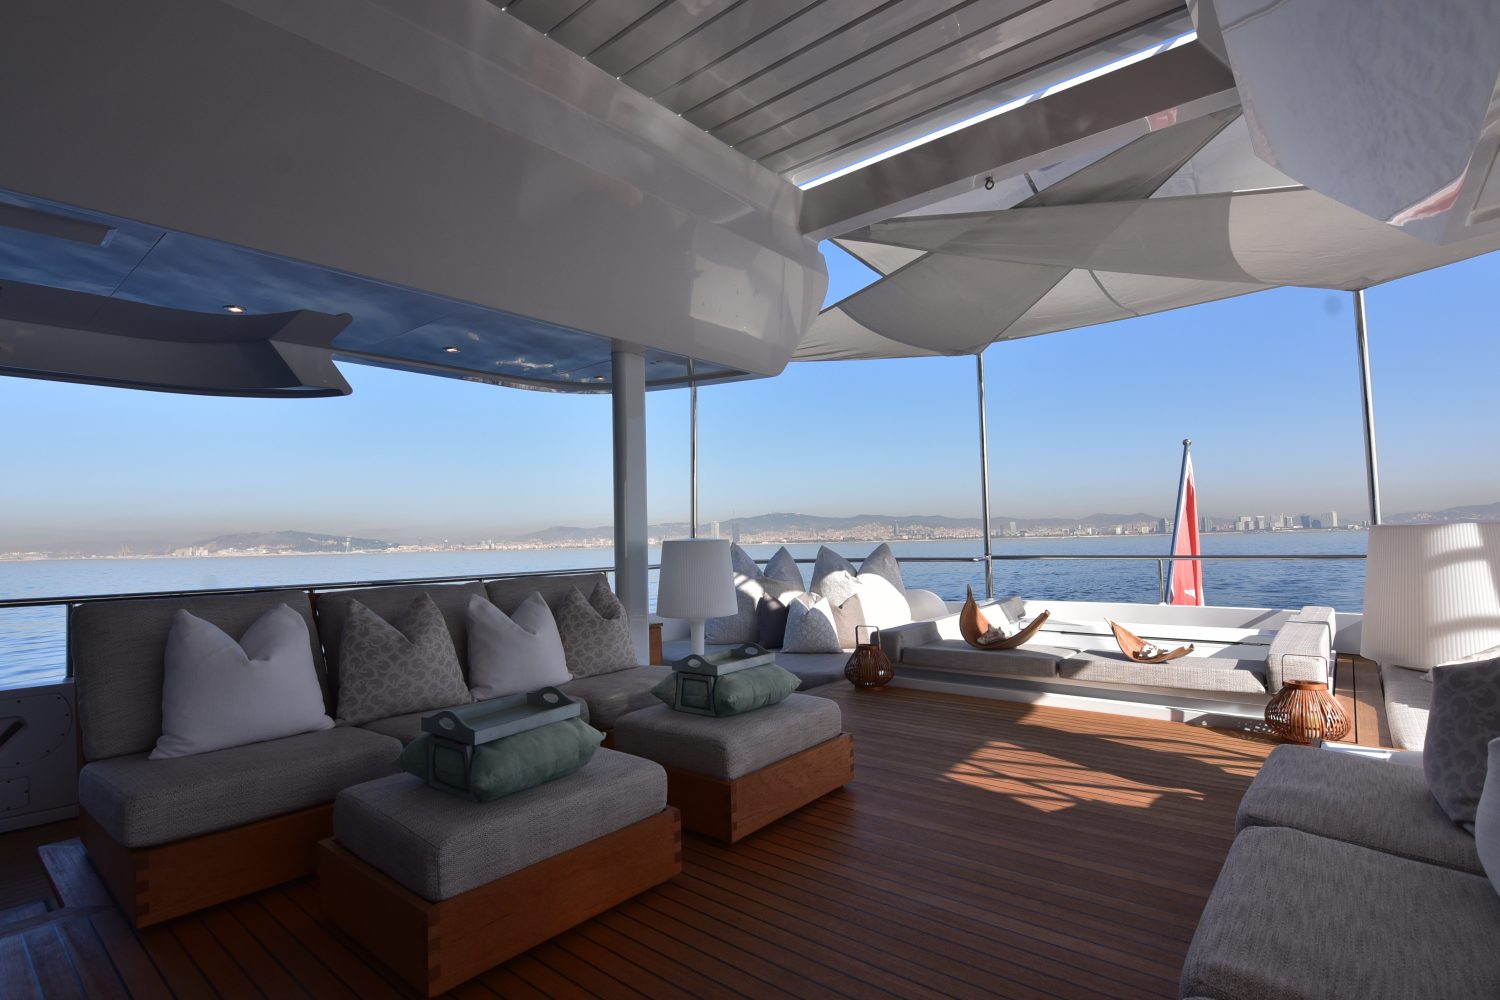 Spacious Deck With Aft Jacuzzi